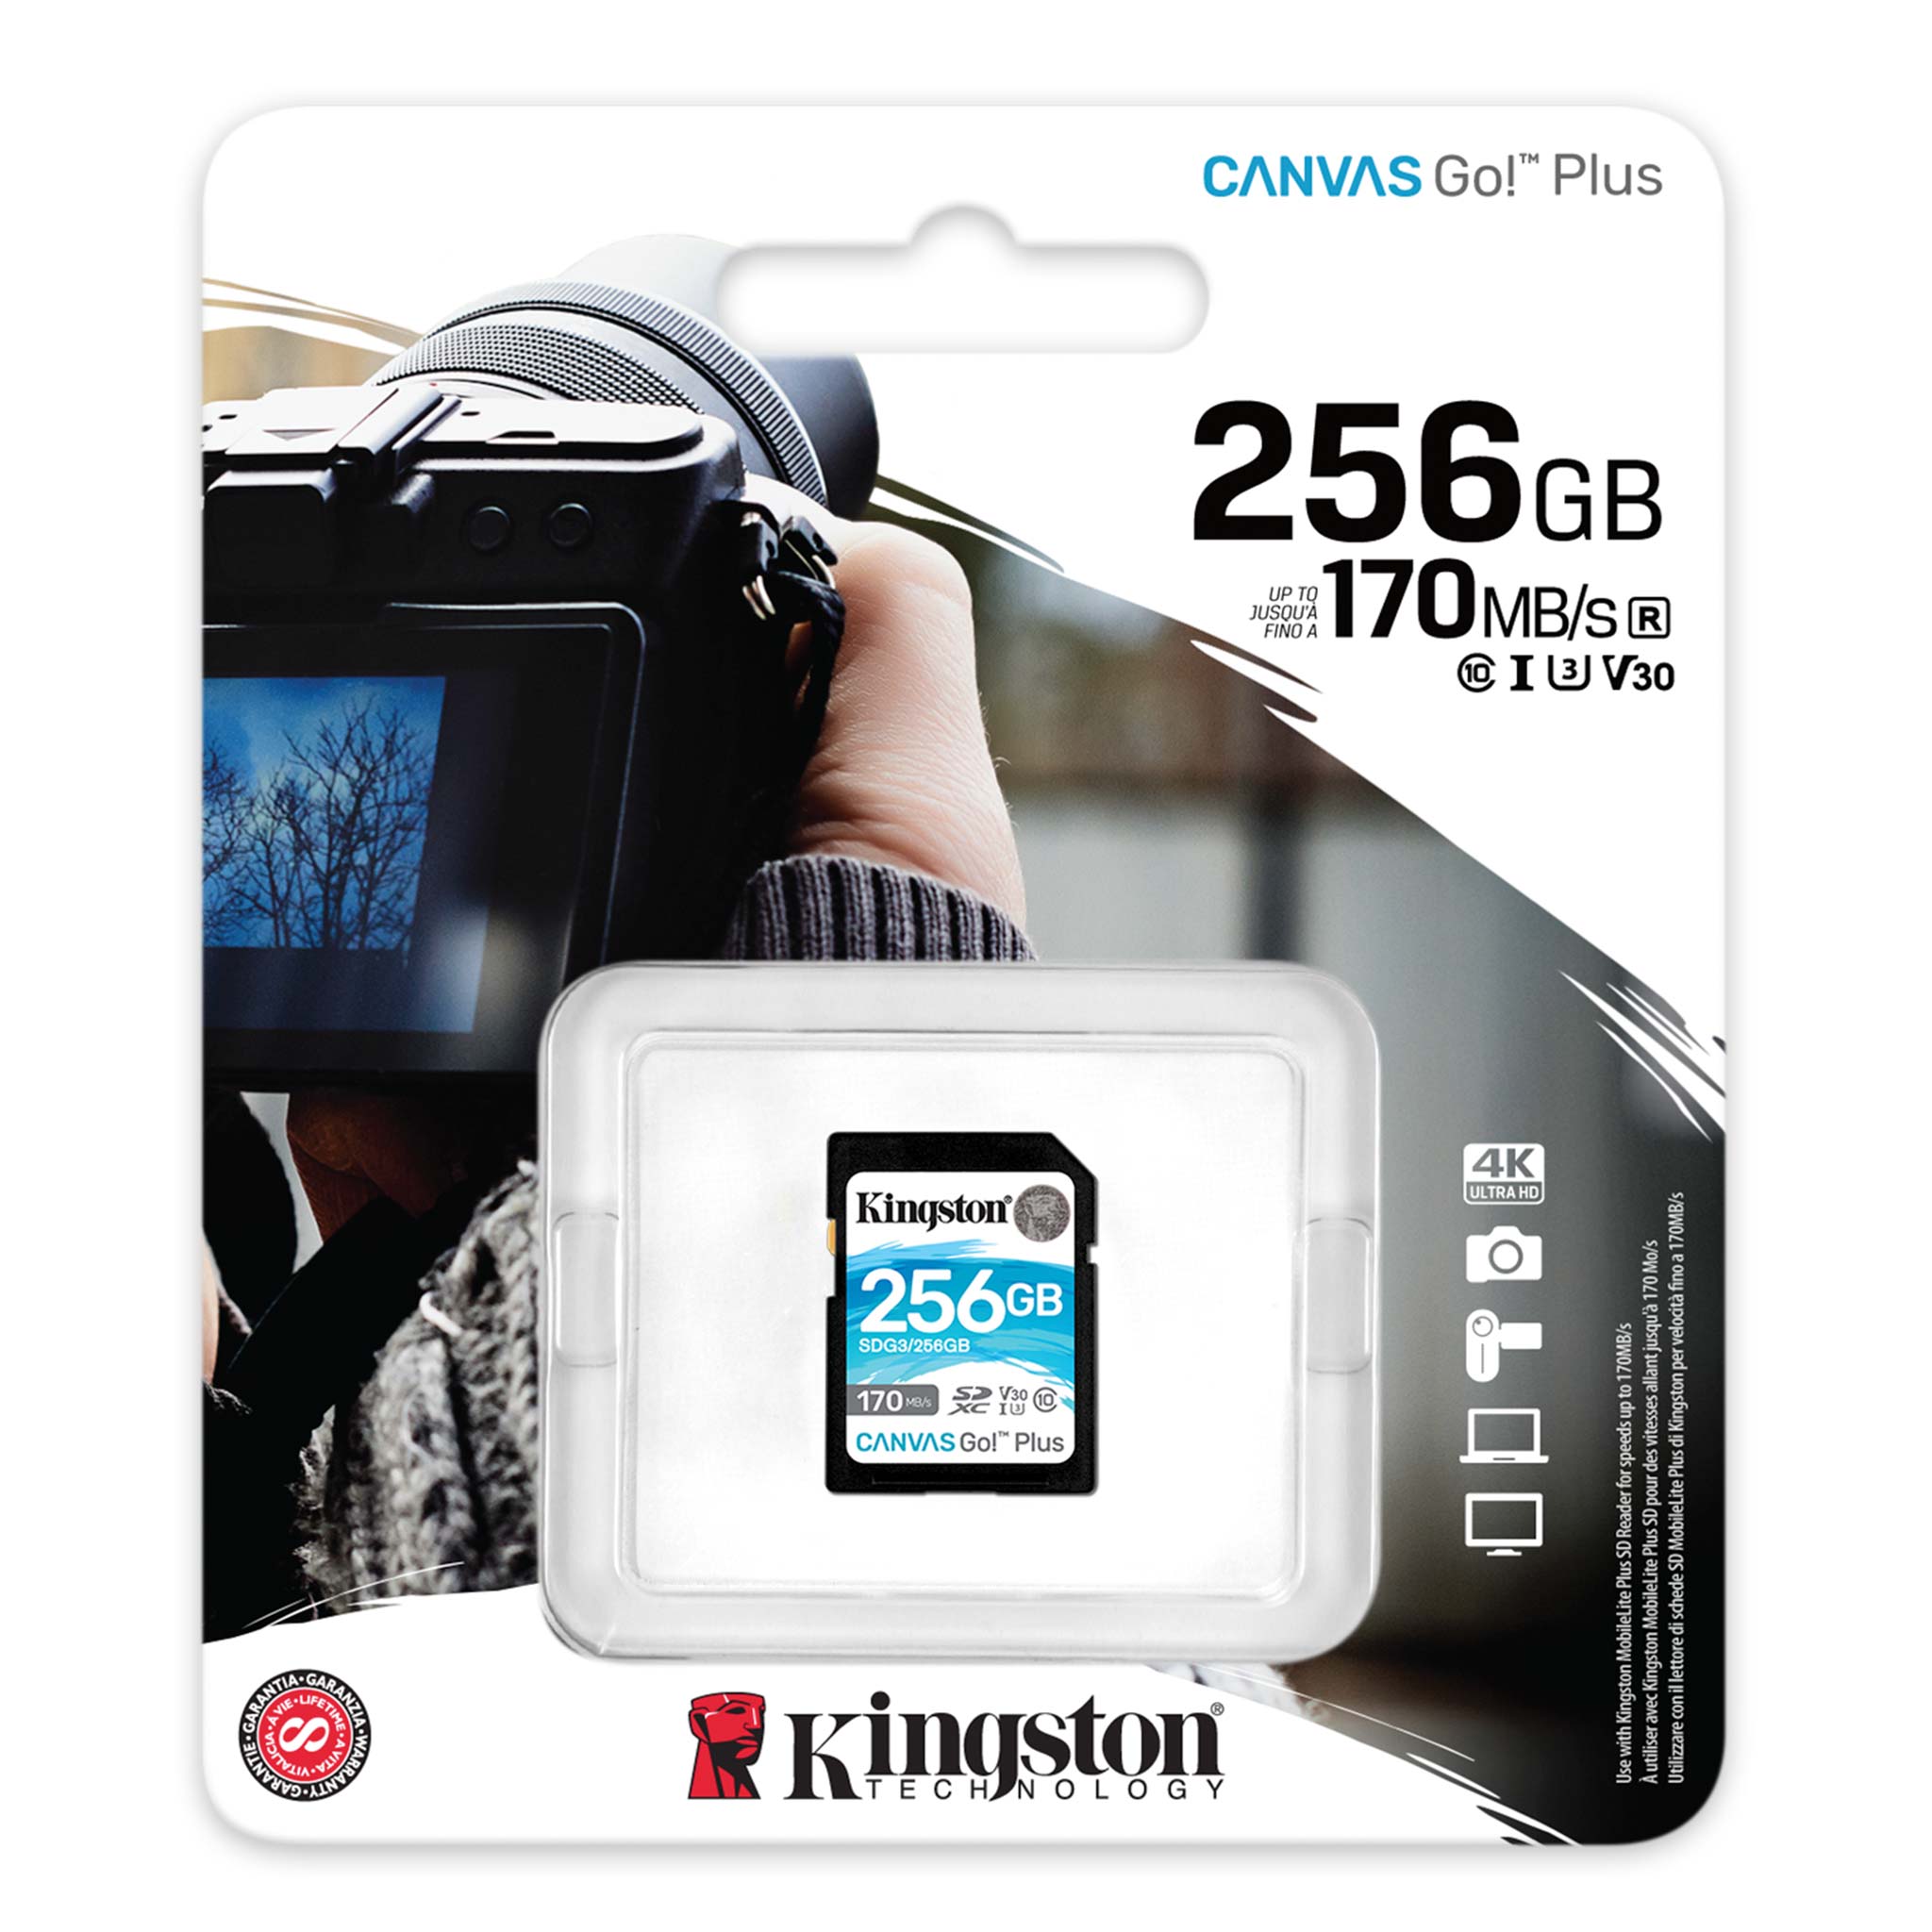 100MBs Works with Kingston Kingston 64GB ARCHOS 80 Cobalt MicroSDXC Canvas Select Plus Card Verified by SanFlash. 